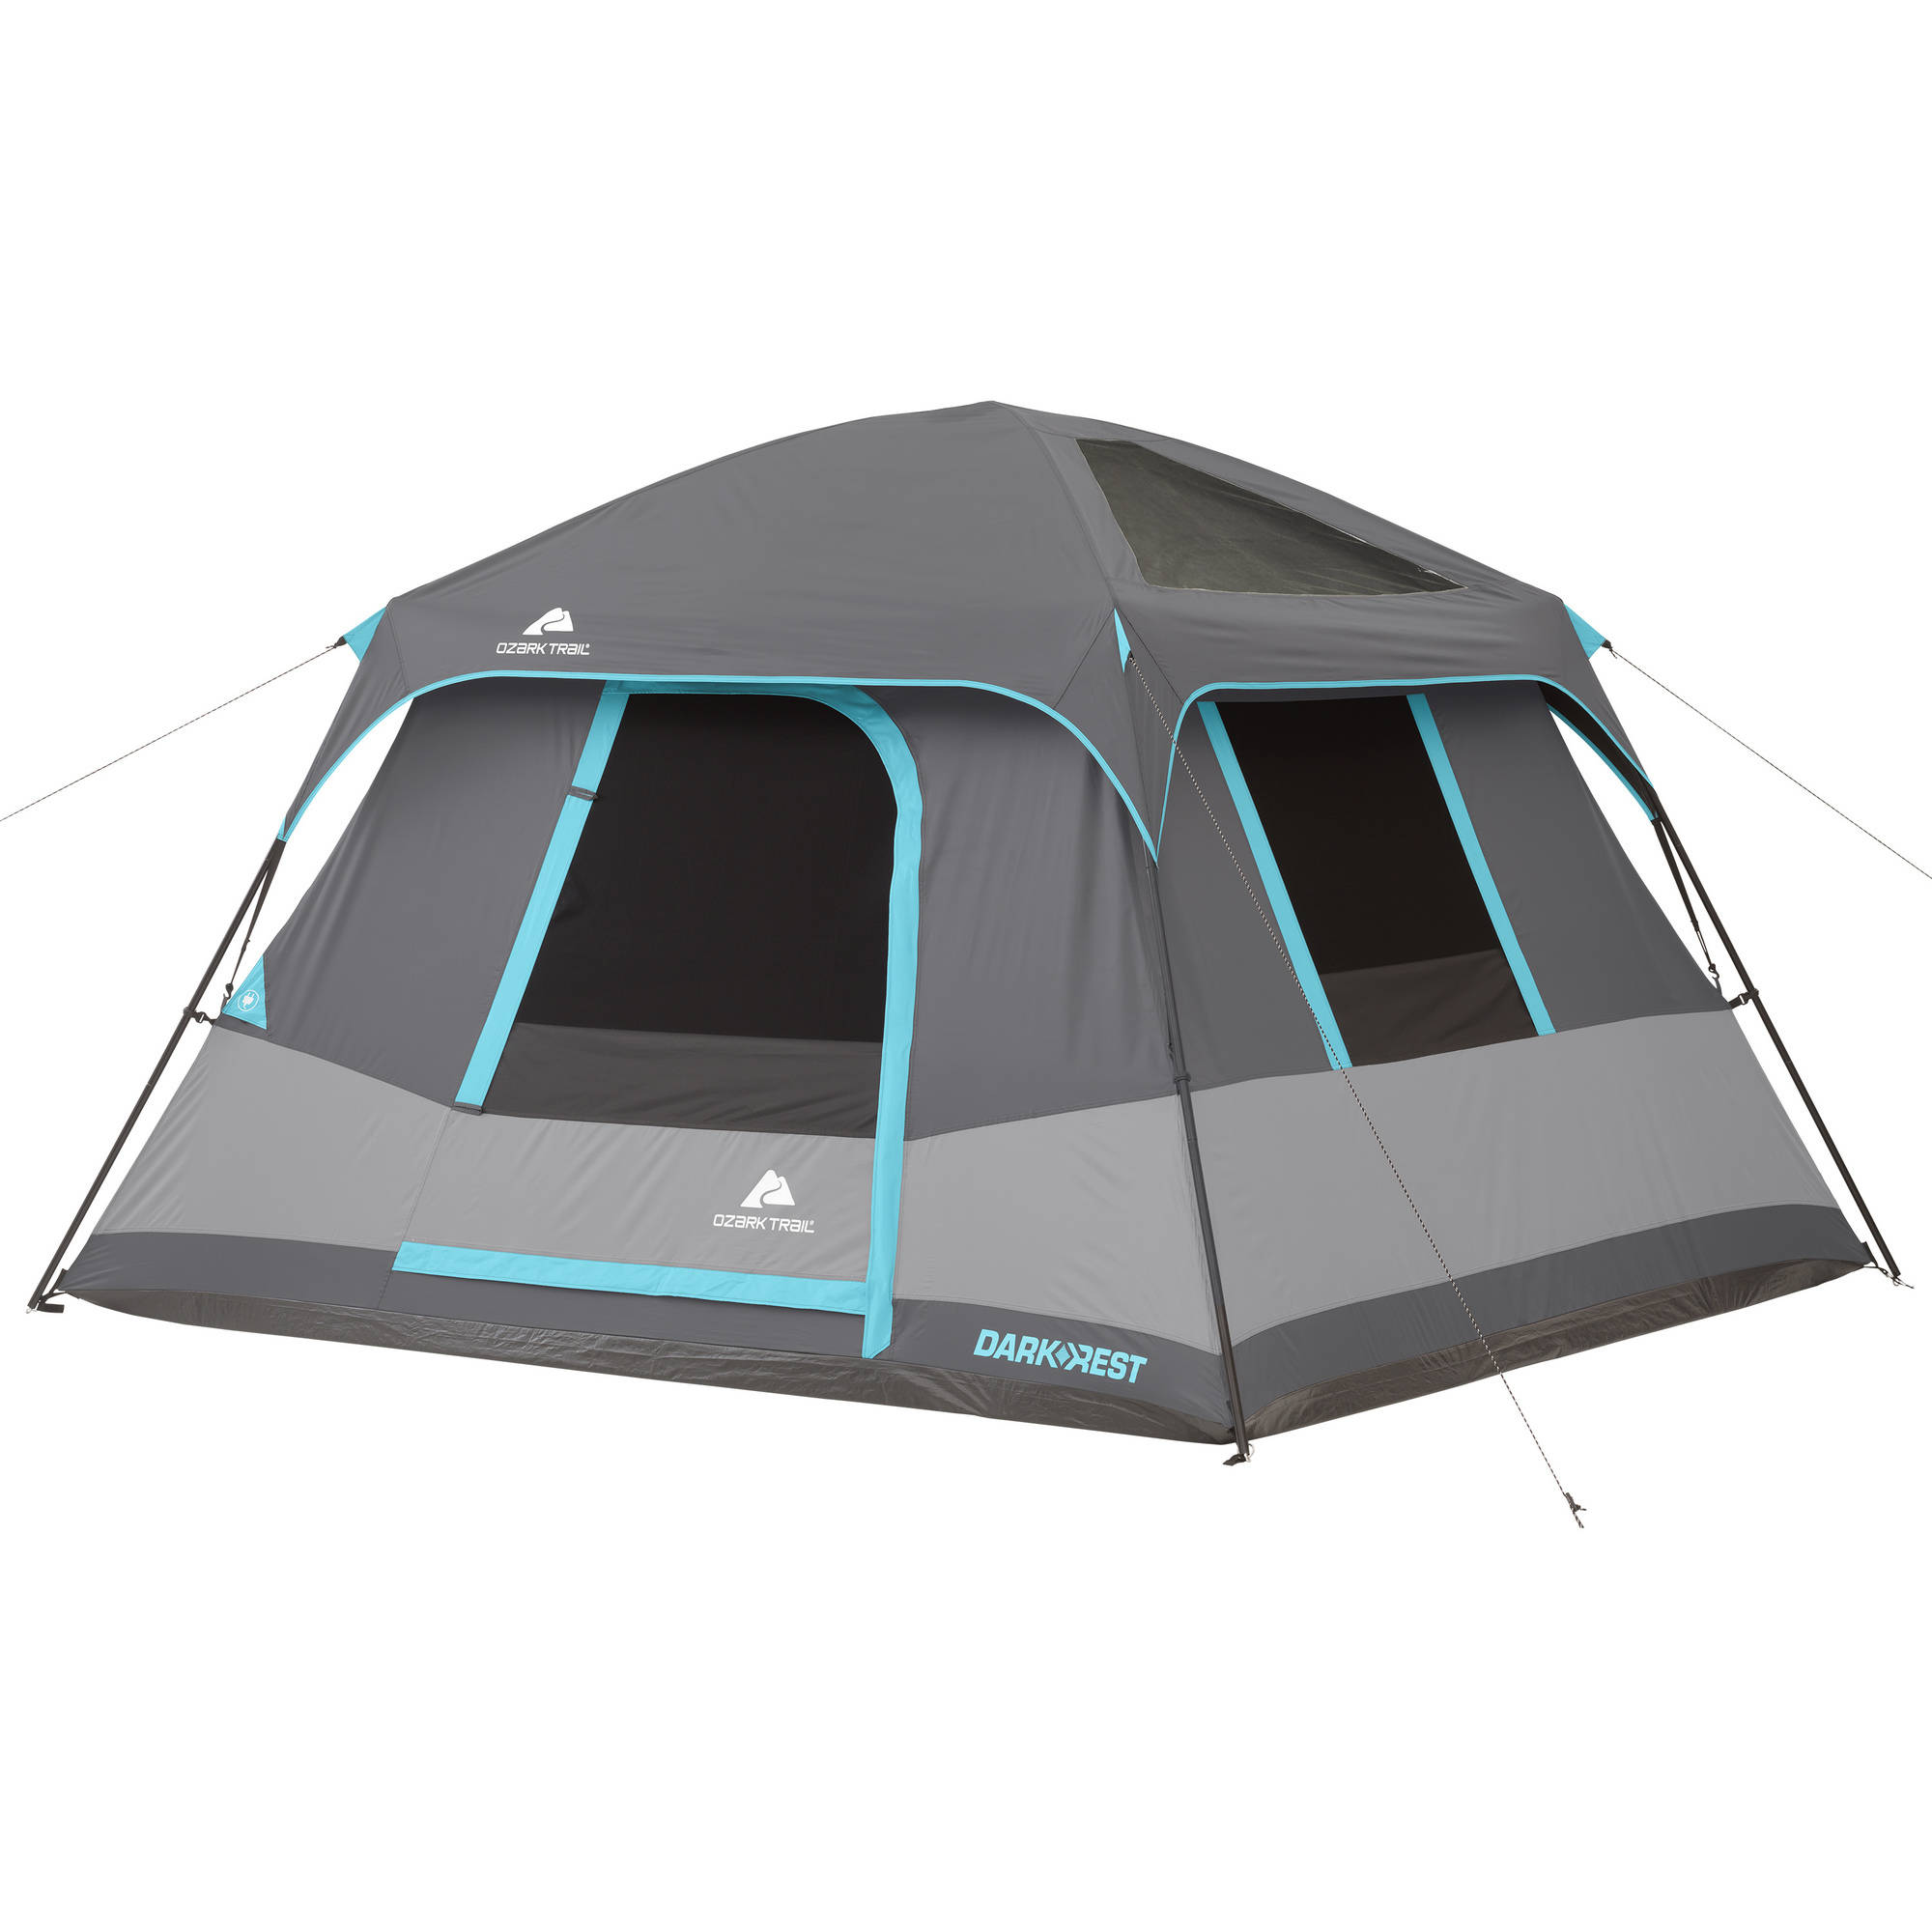 Ozark Trail 10' x 9' 6-Person Dark Rest Cabin Tent w/Skylight Ceiling Panels, 15.4 lbs - image 1 of 7